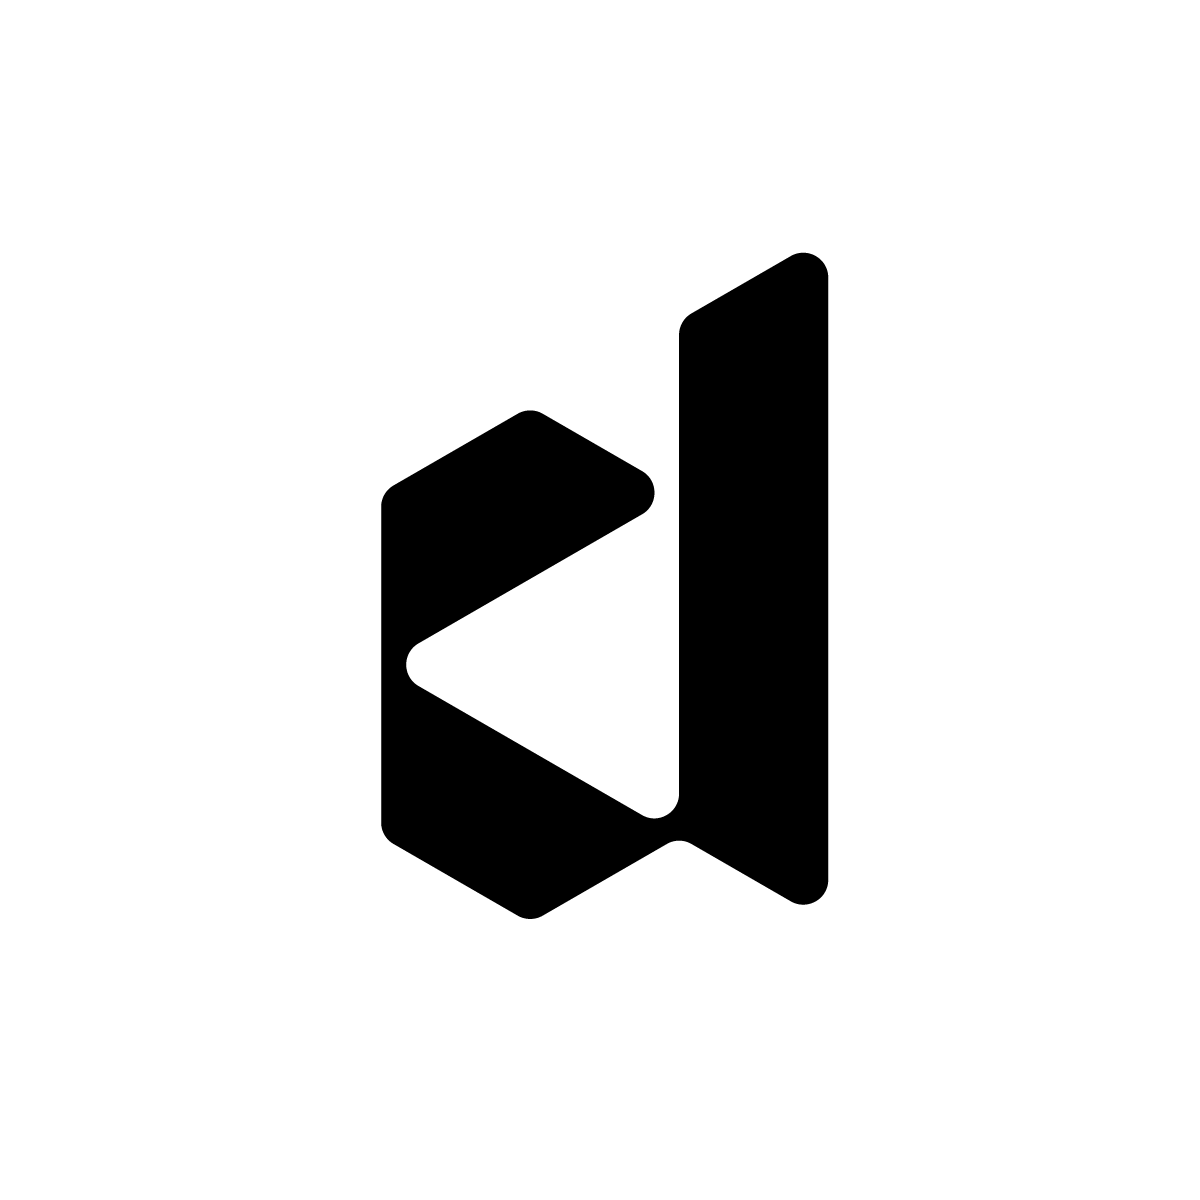 Triangular D Logo: Abstract lowercase letter d in triangular shape